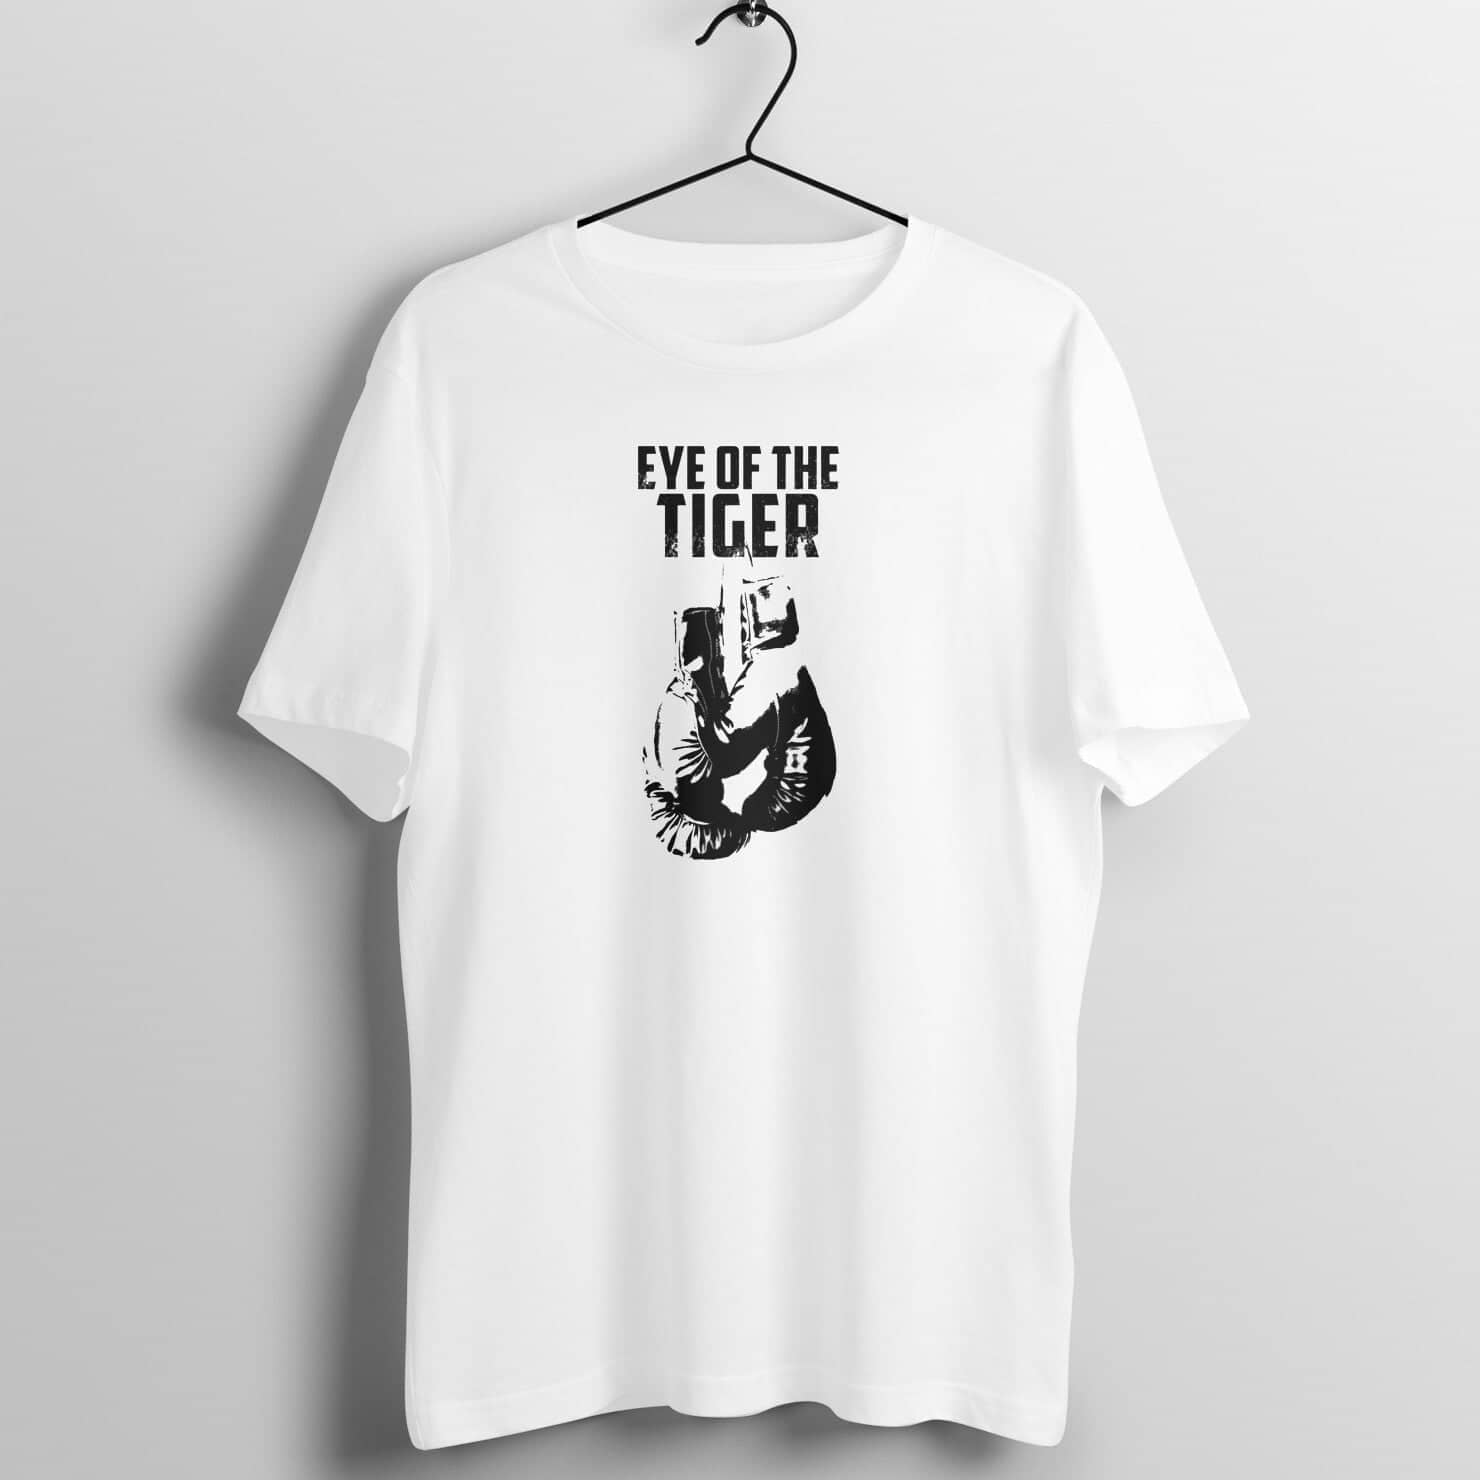 Eye of the Tiger Special White Rocky's Fighting T Shirt for Men and Women Printrove White S 